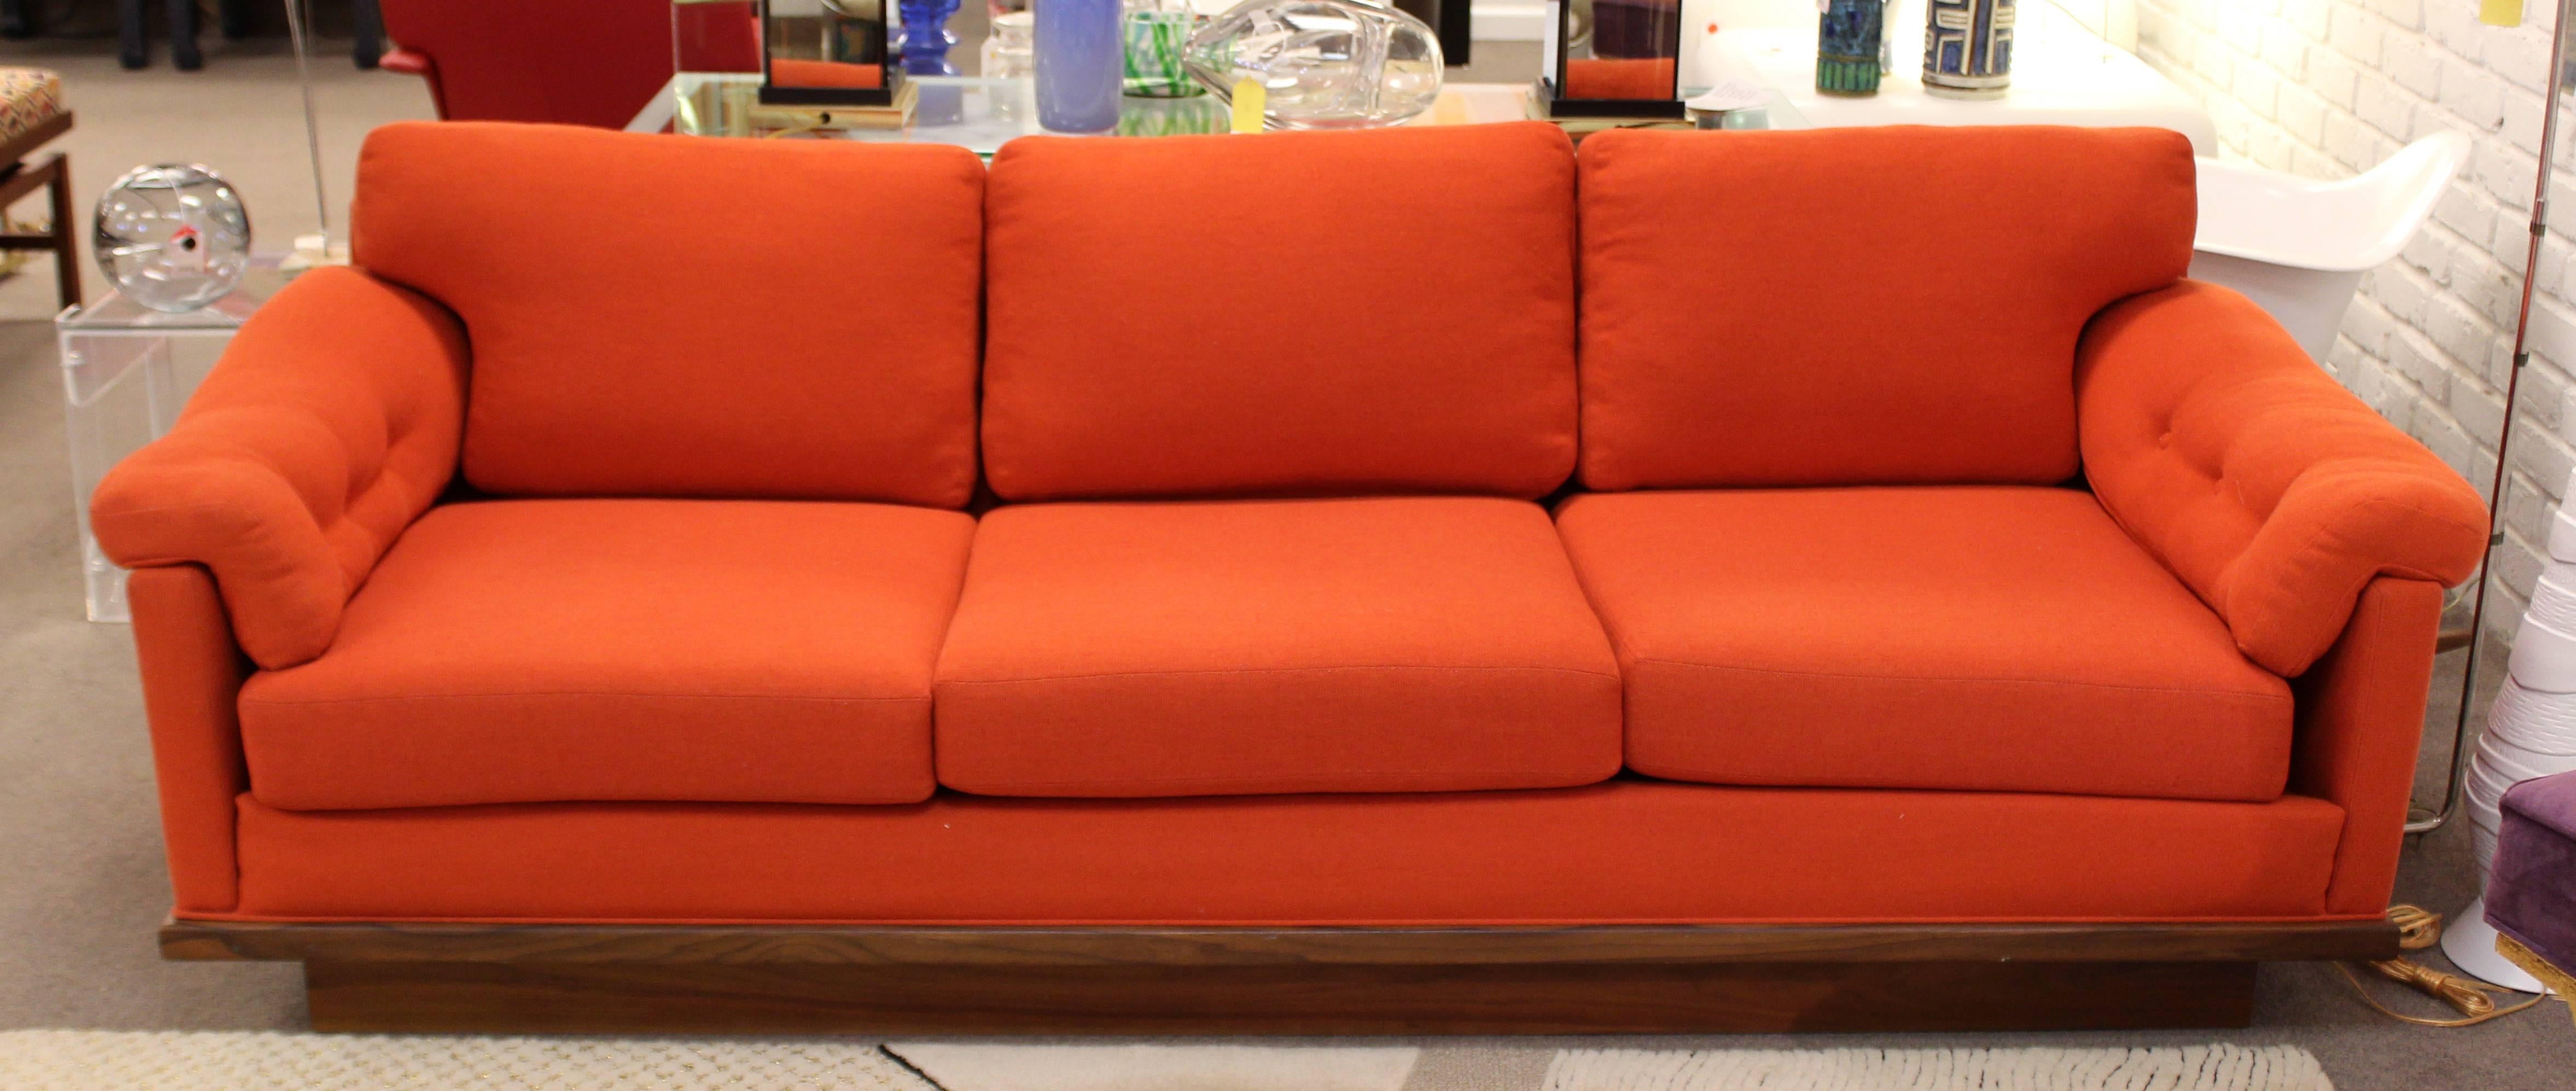 For your consideration is a beautiful, red-orange sofa, on a walnut plinth base by Milo Baughman, circa 1960s. Cushions have been newly re-foamed. In excellent condition. The dimensions are 82